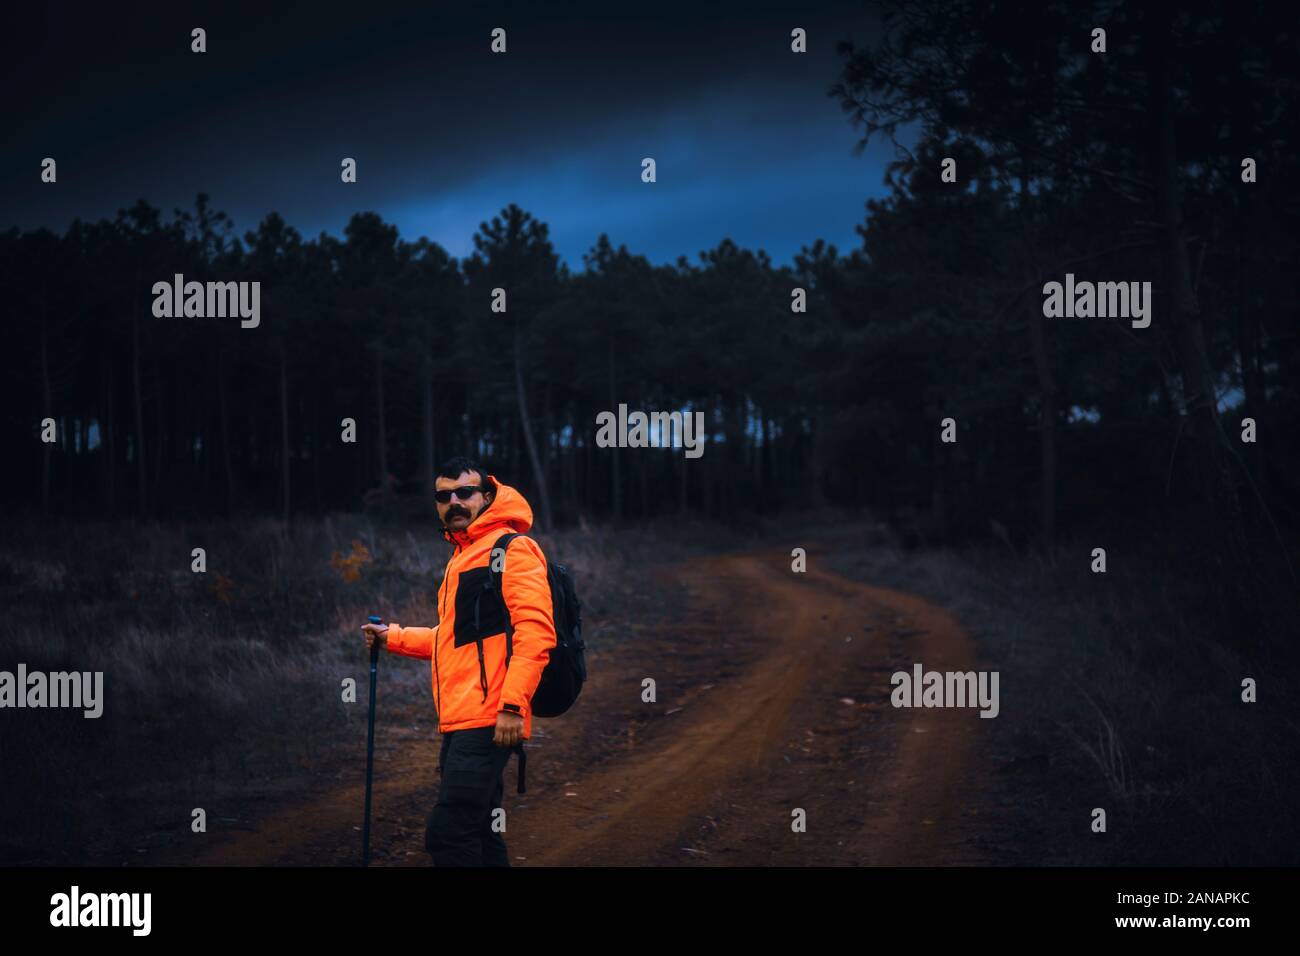 A Young man adventurer with contrast orange jacket posing on the path to jungle with gloomy sky under dramatic clouds Stock Photo